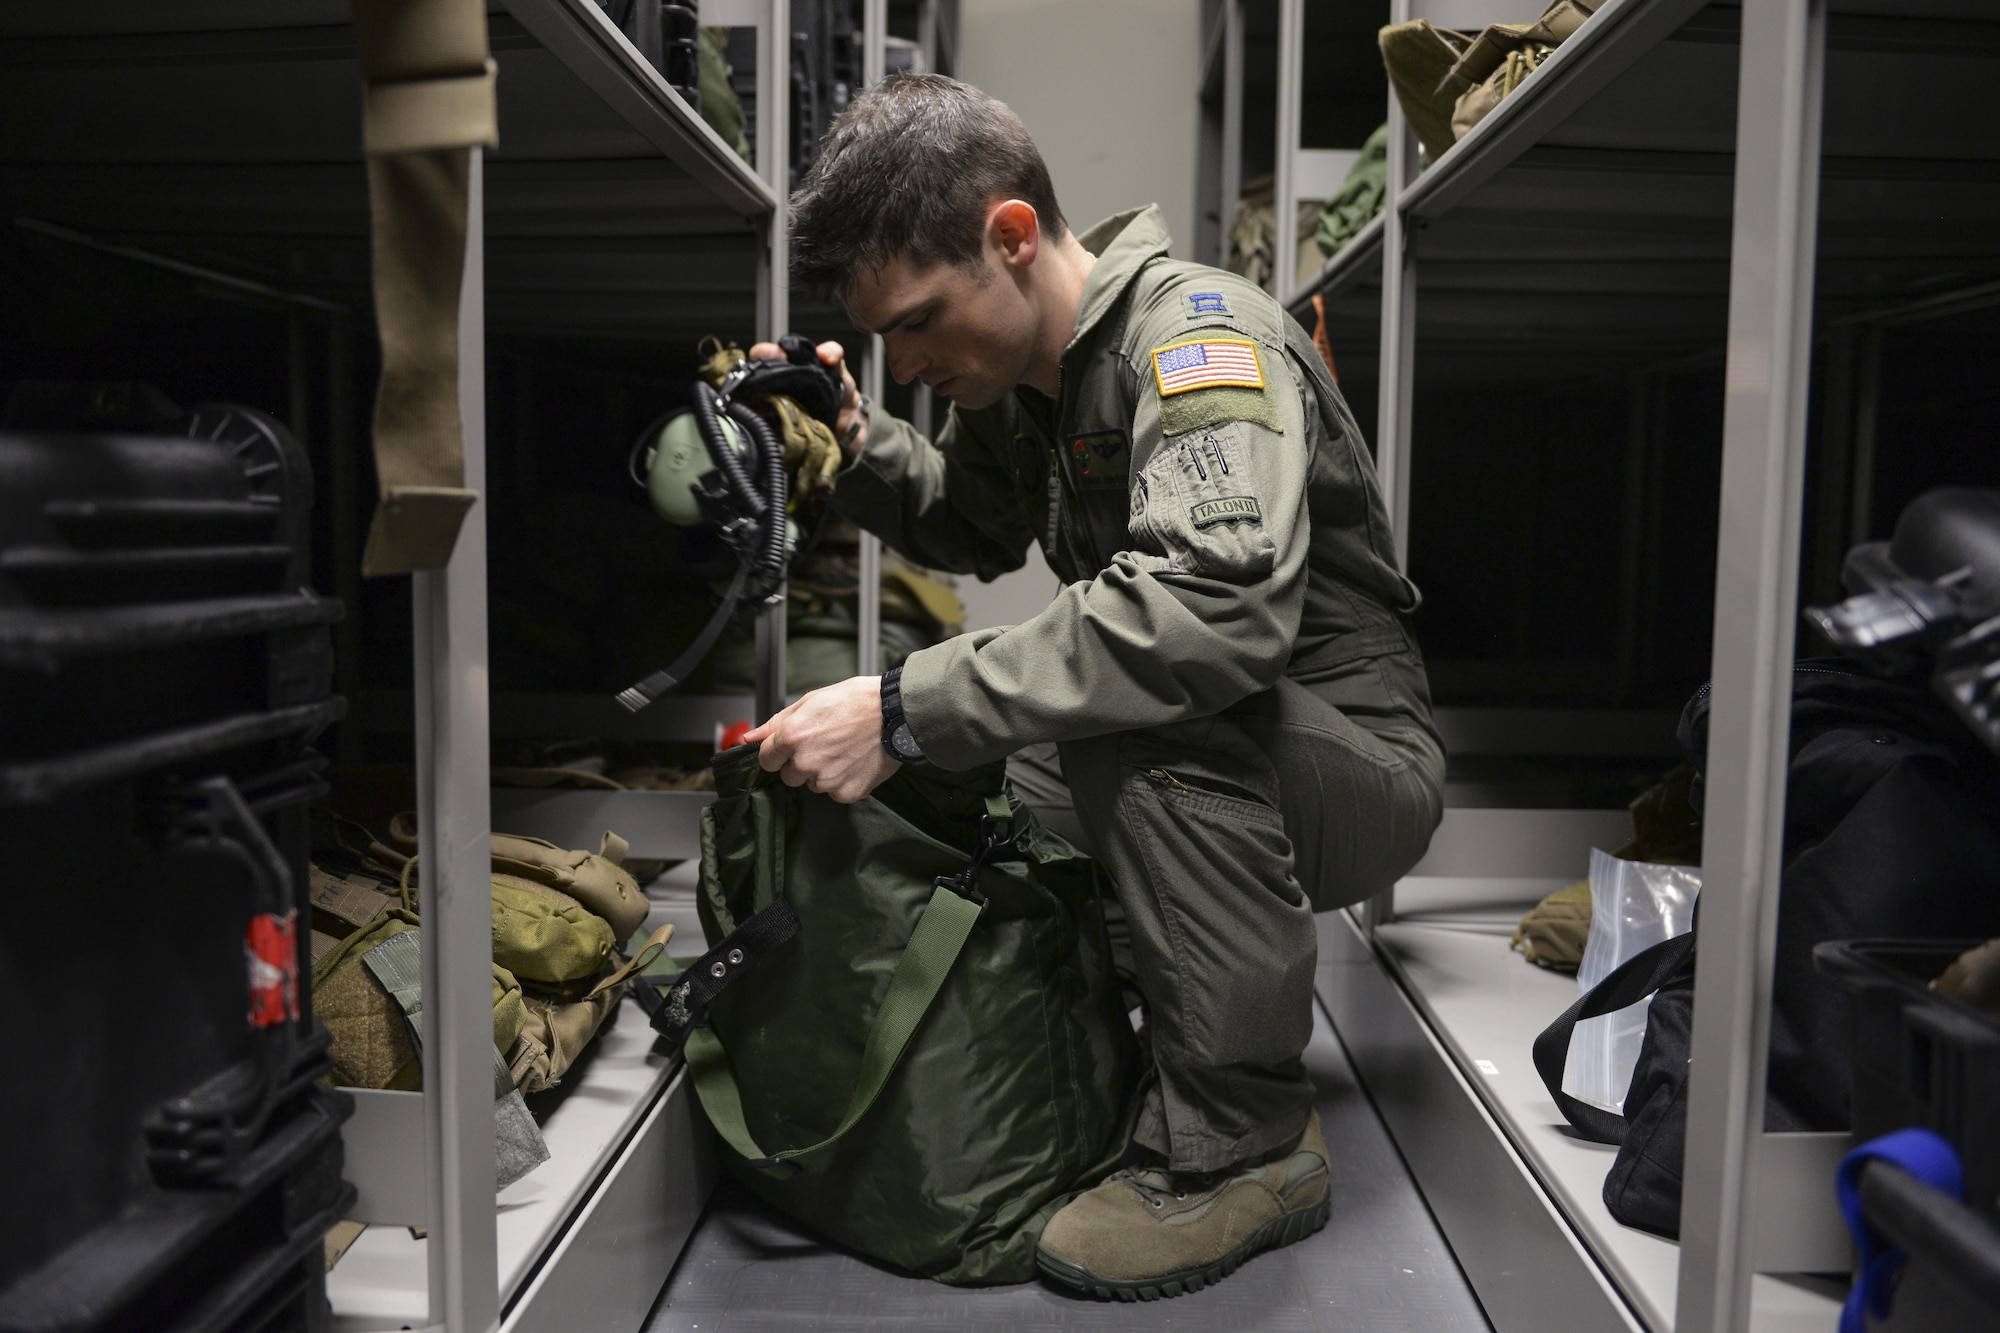 U.S. Air Force Capt. Thomas Sanders, 353rd Special Operations Support Squadron instructor navigator, acquires a headset from a storage unit prior to a training mission Sept. 10, 2015 at Kadena Air Base, Japan. Sanders received the Airlift/Tanker Association Young Leadership Award during an award banquet held Oct. 29 in Orlando, Fla. (U.S. Air Force photo by Airman 1st Class Corey M. Pettis) 